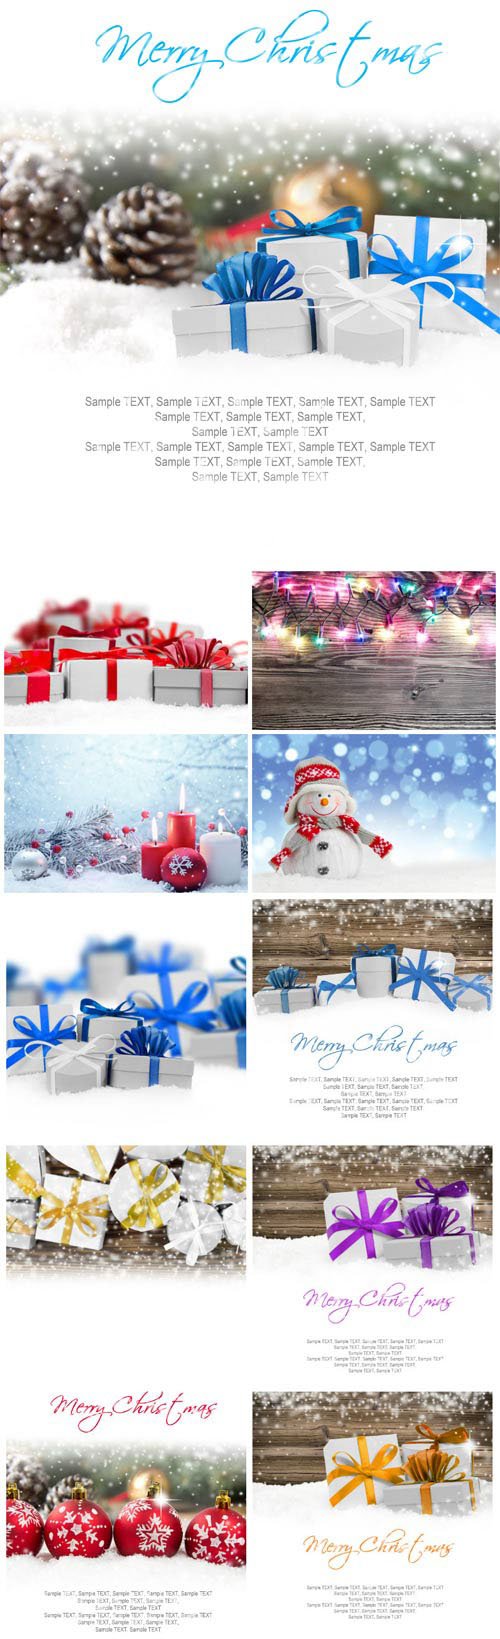 New Year and Christmas stock photos №18